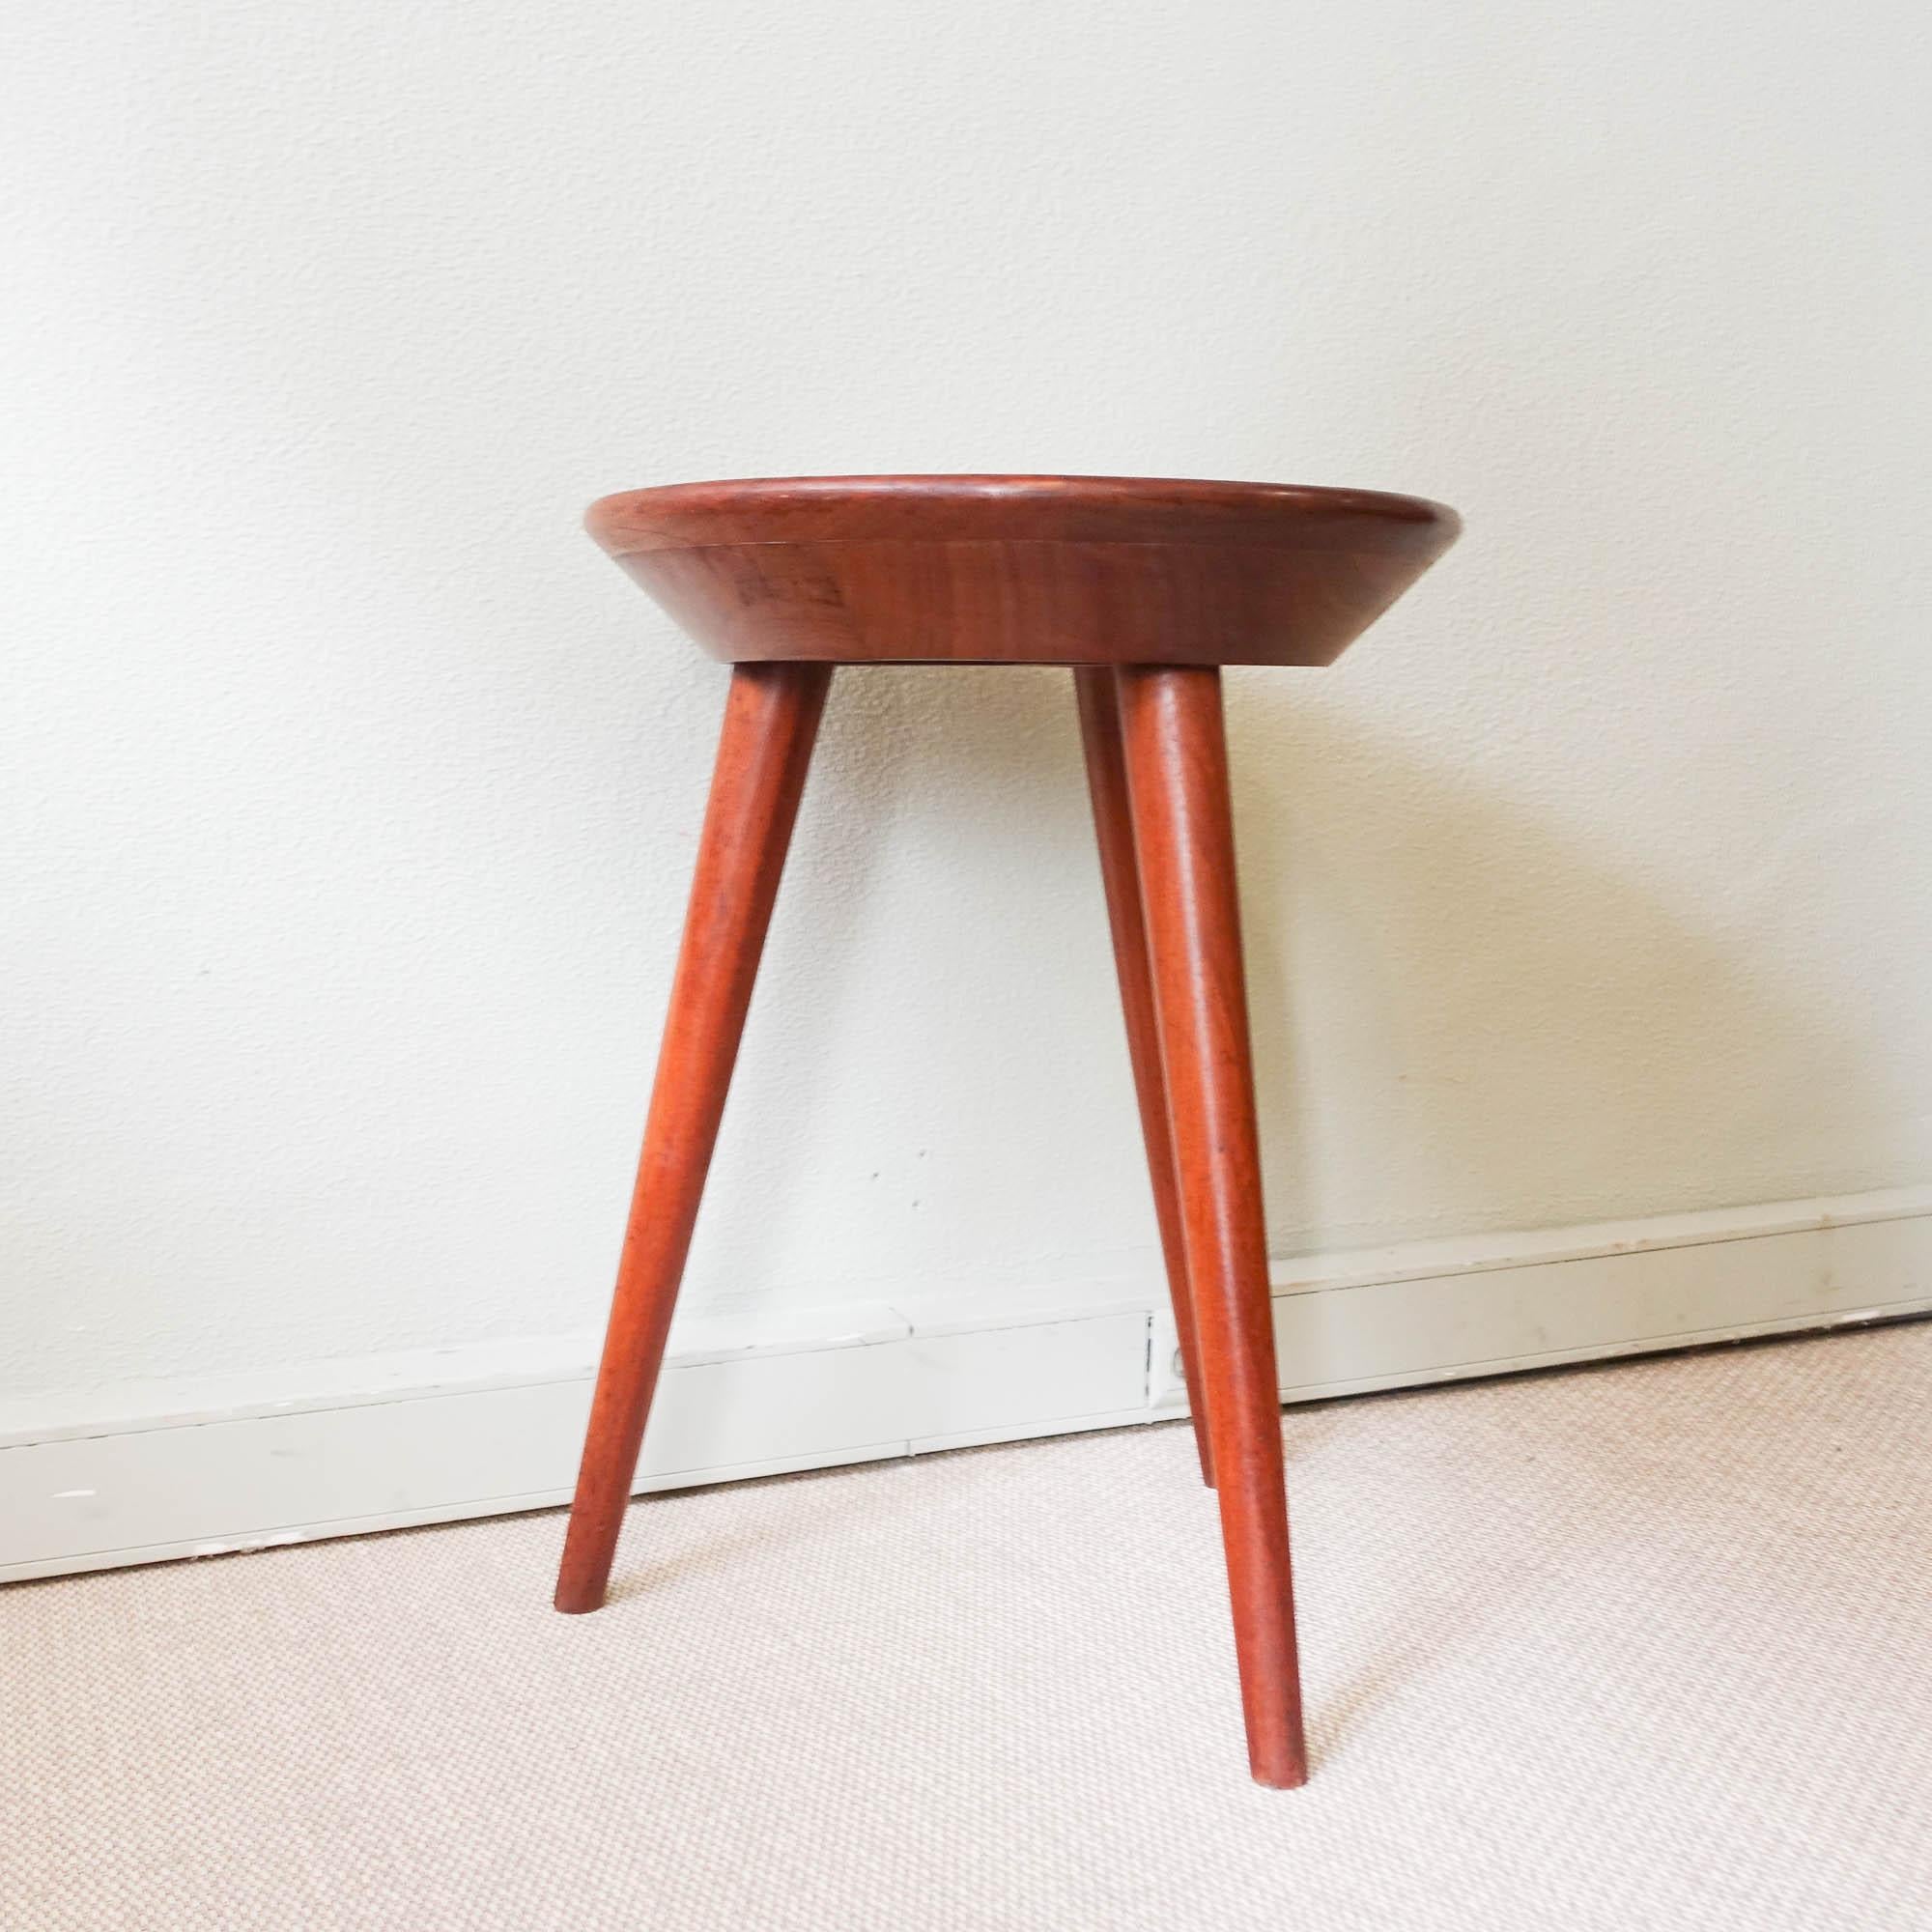 Vintage Portuguese Three Leg Side Table from Altamira, 1950's For Sale 3